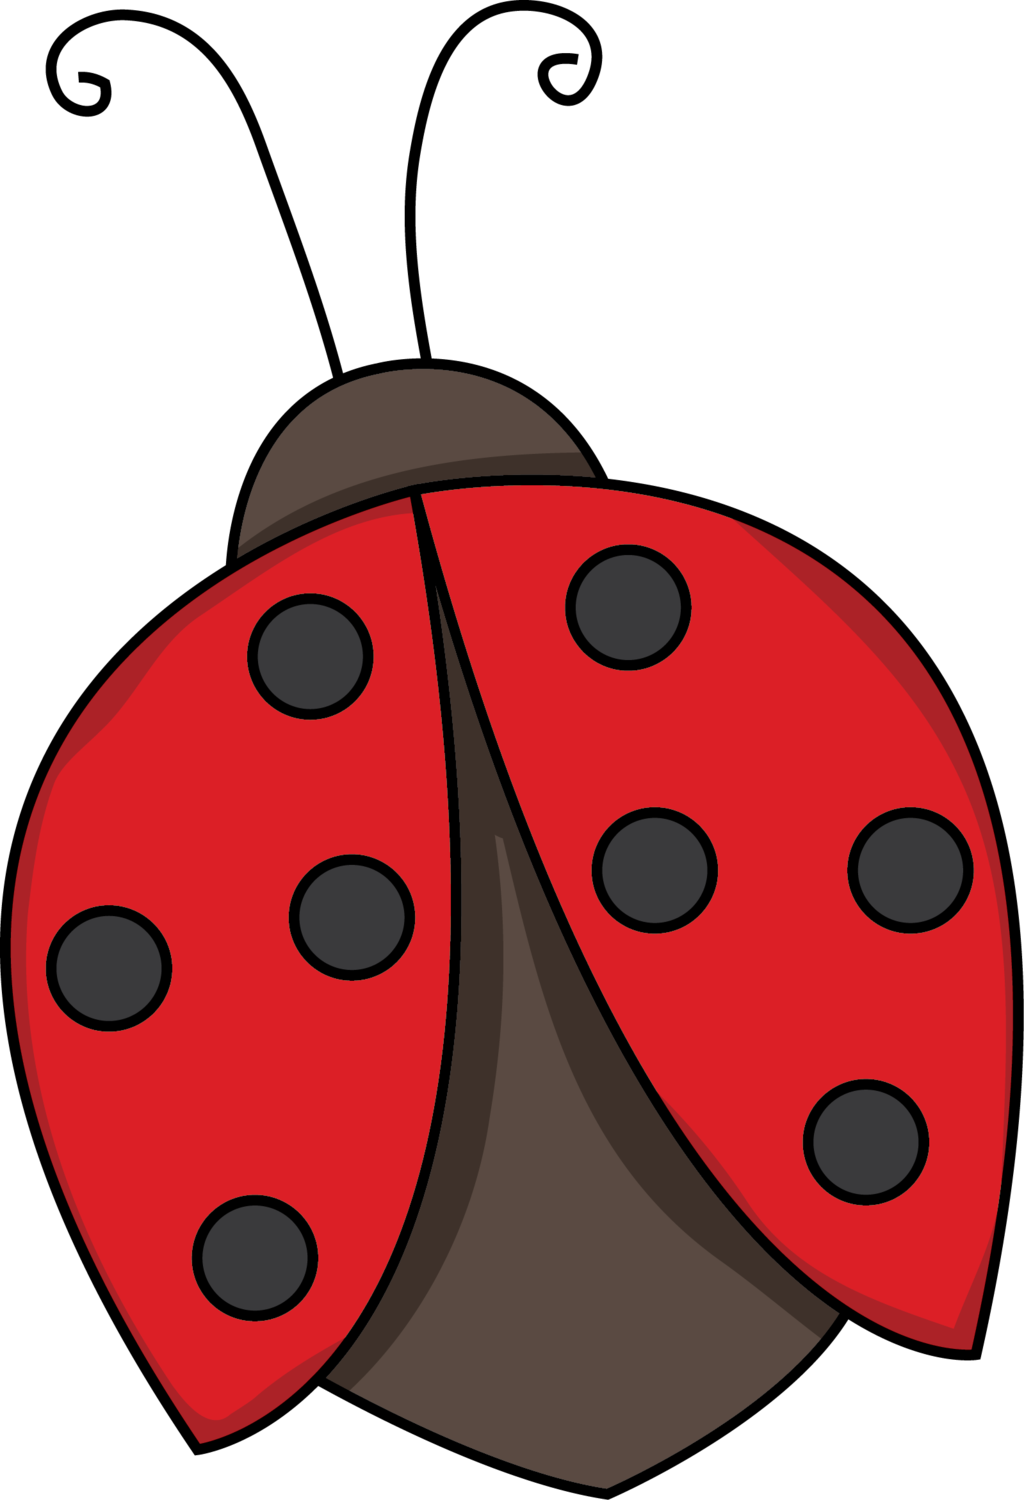 Free Ladybug Cliparts, Download Free Ladybug Cliparts png images, Free